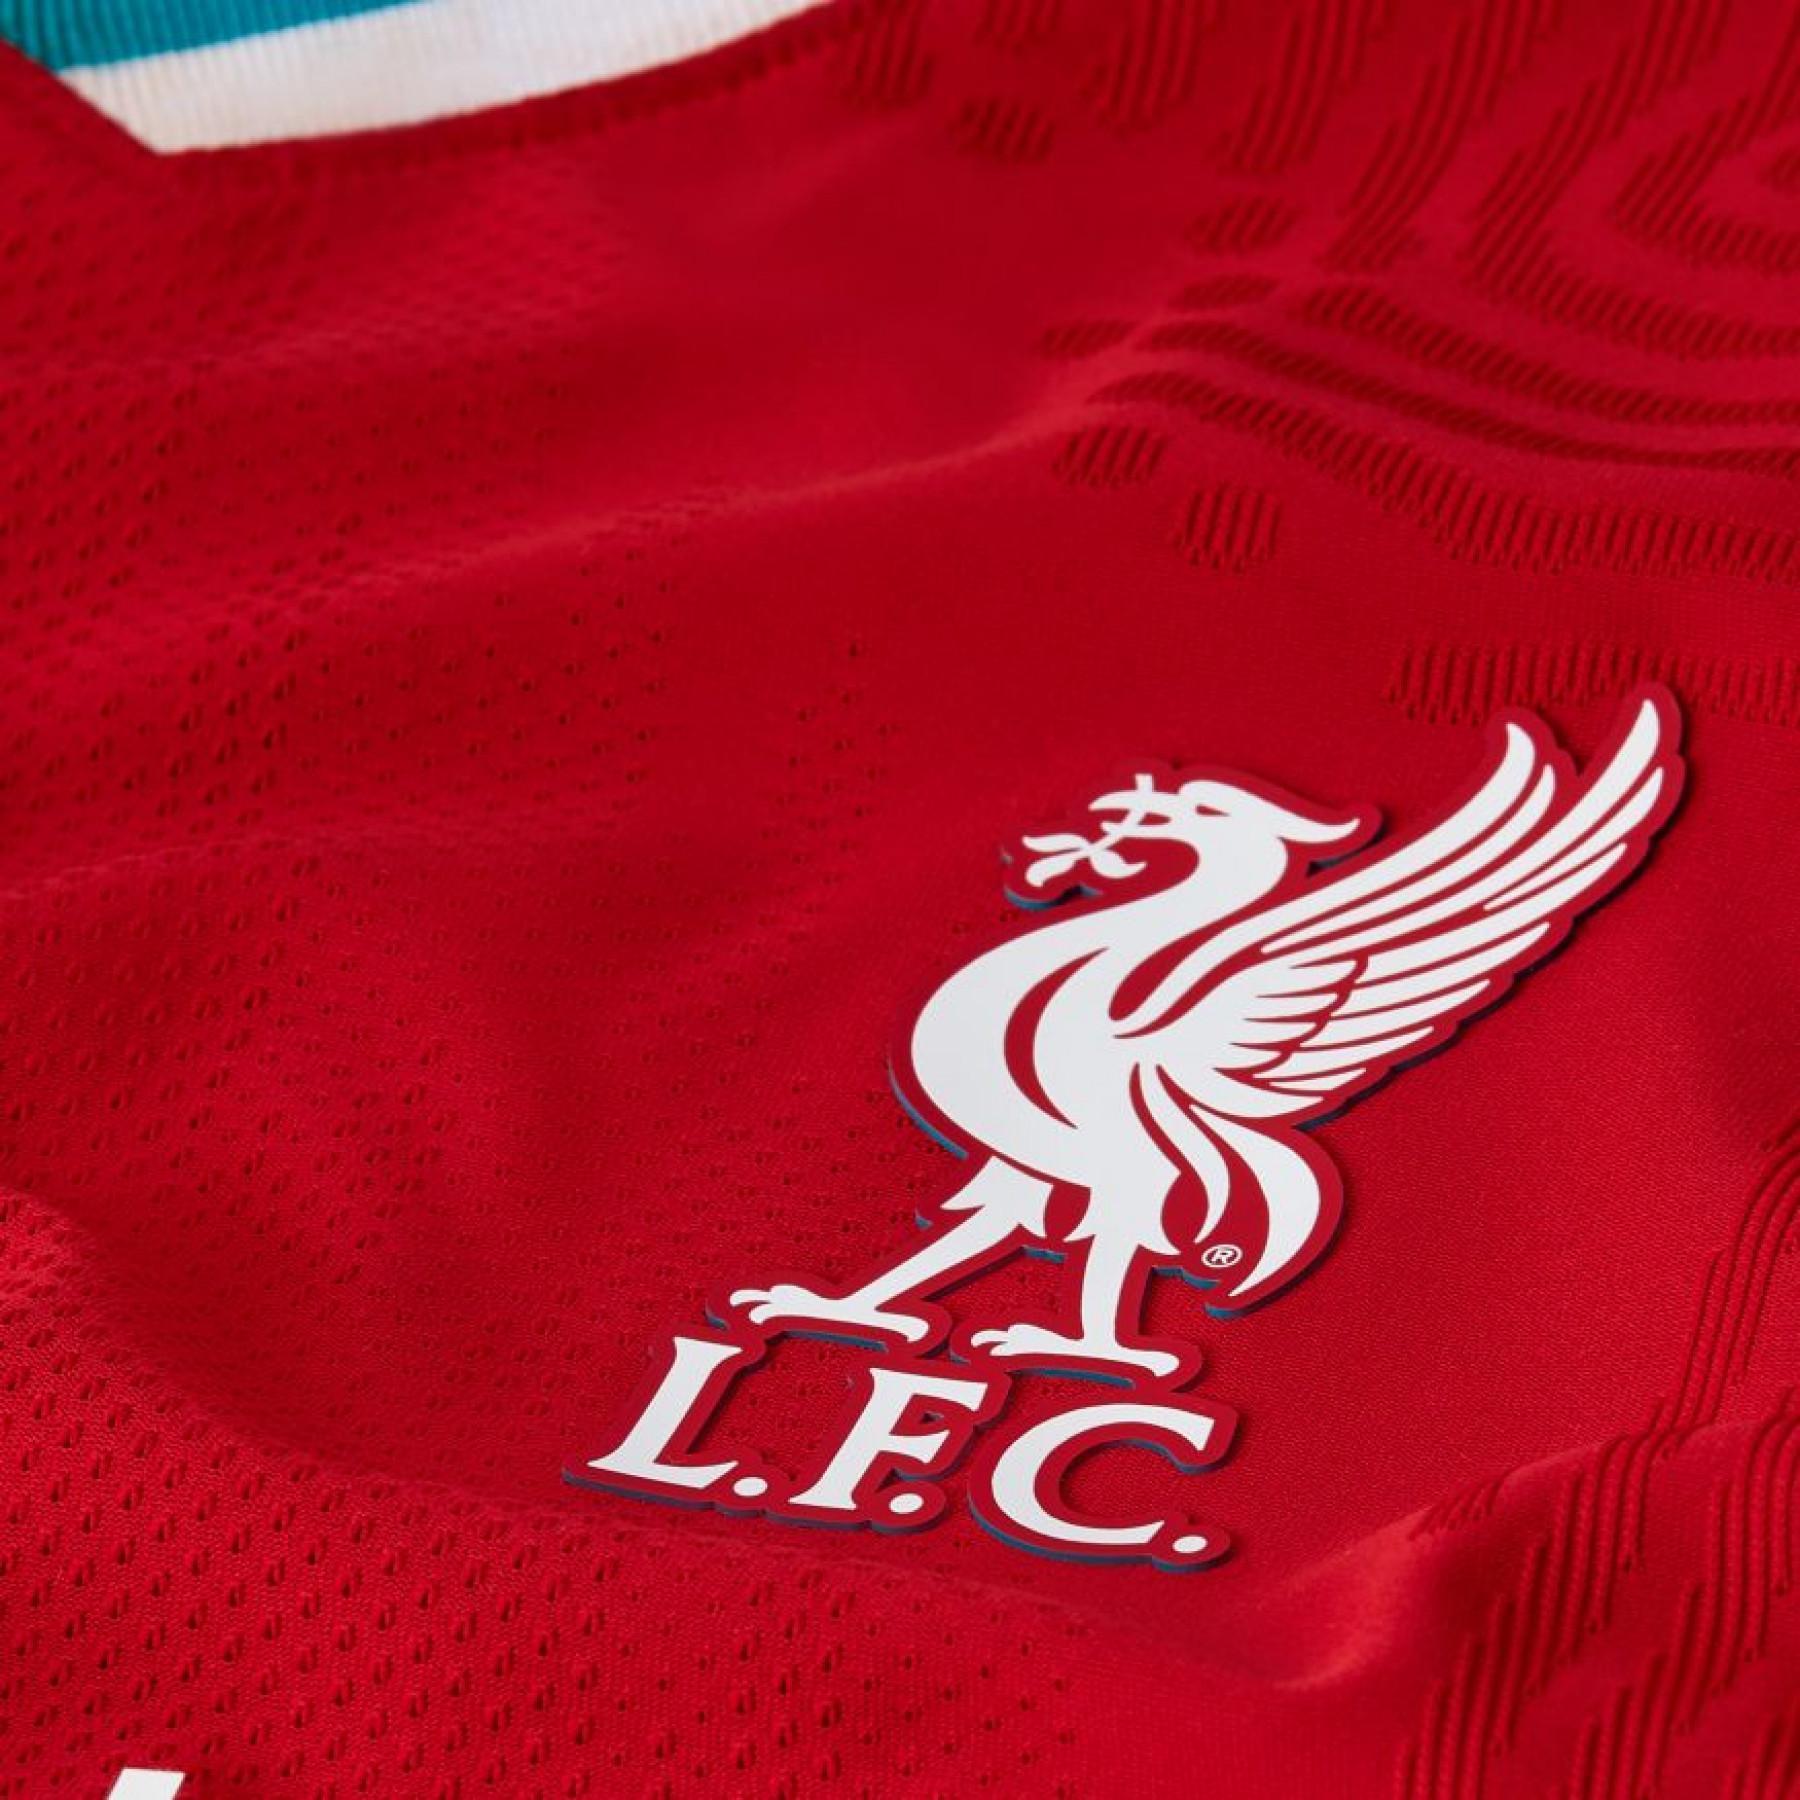 Authentic home jersey Liverpool FC 2020/21